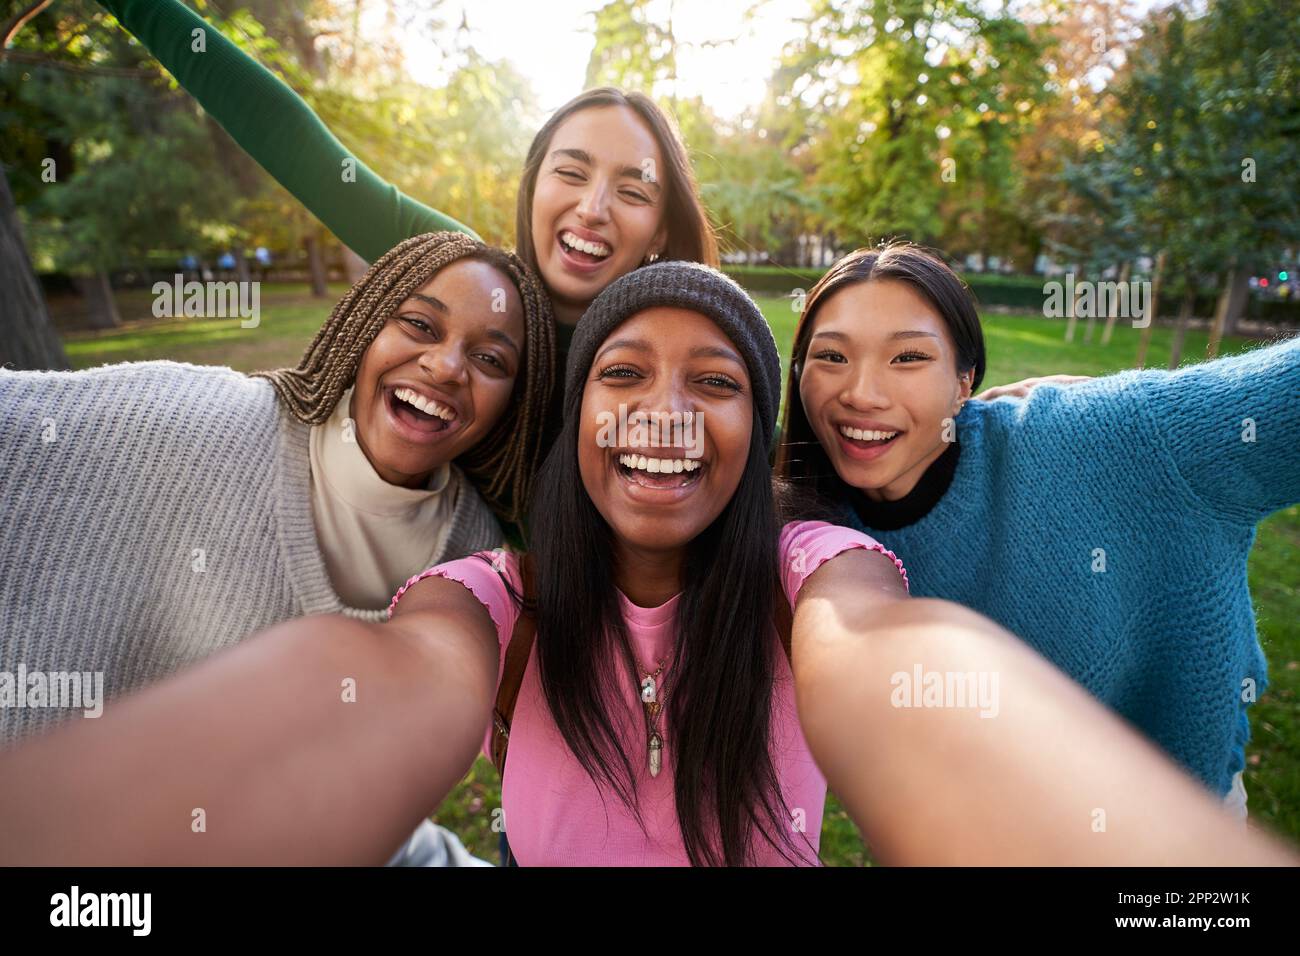 Group girls having fun outdoors taking selfie. Four smiling young women posing happily in the park.  Stock Photo